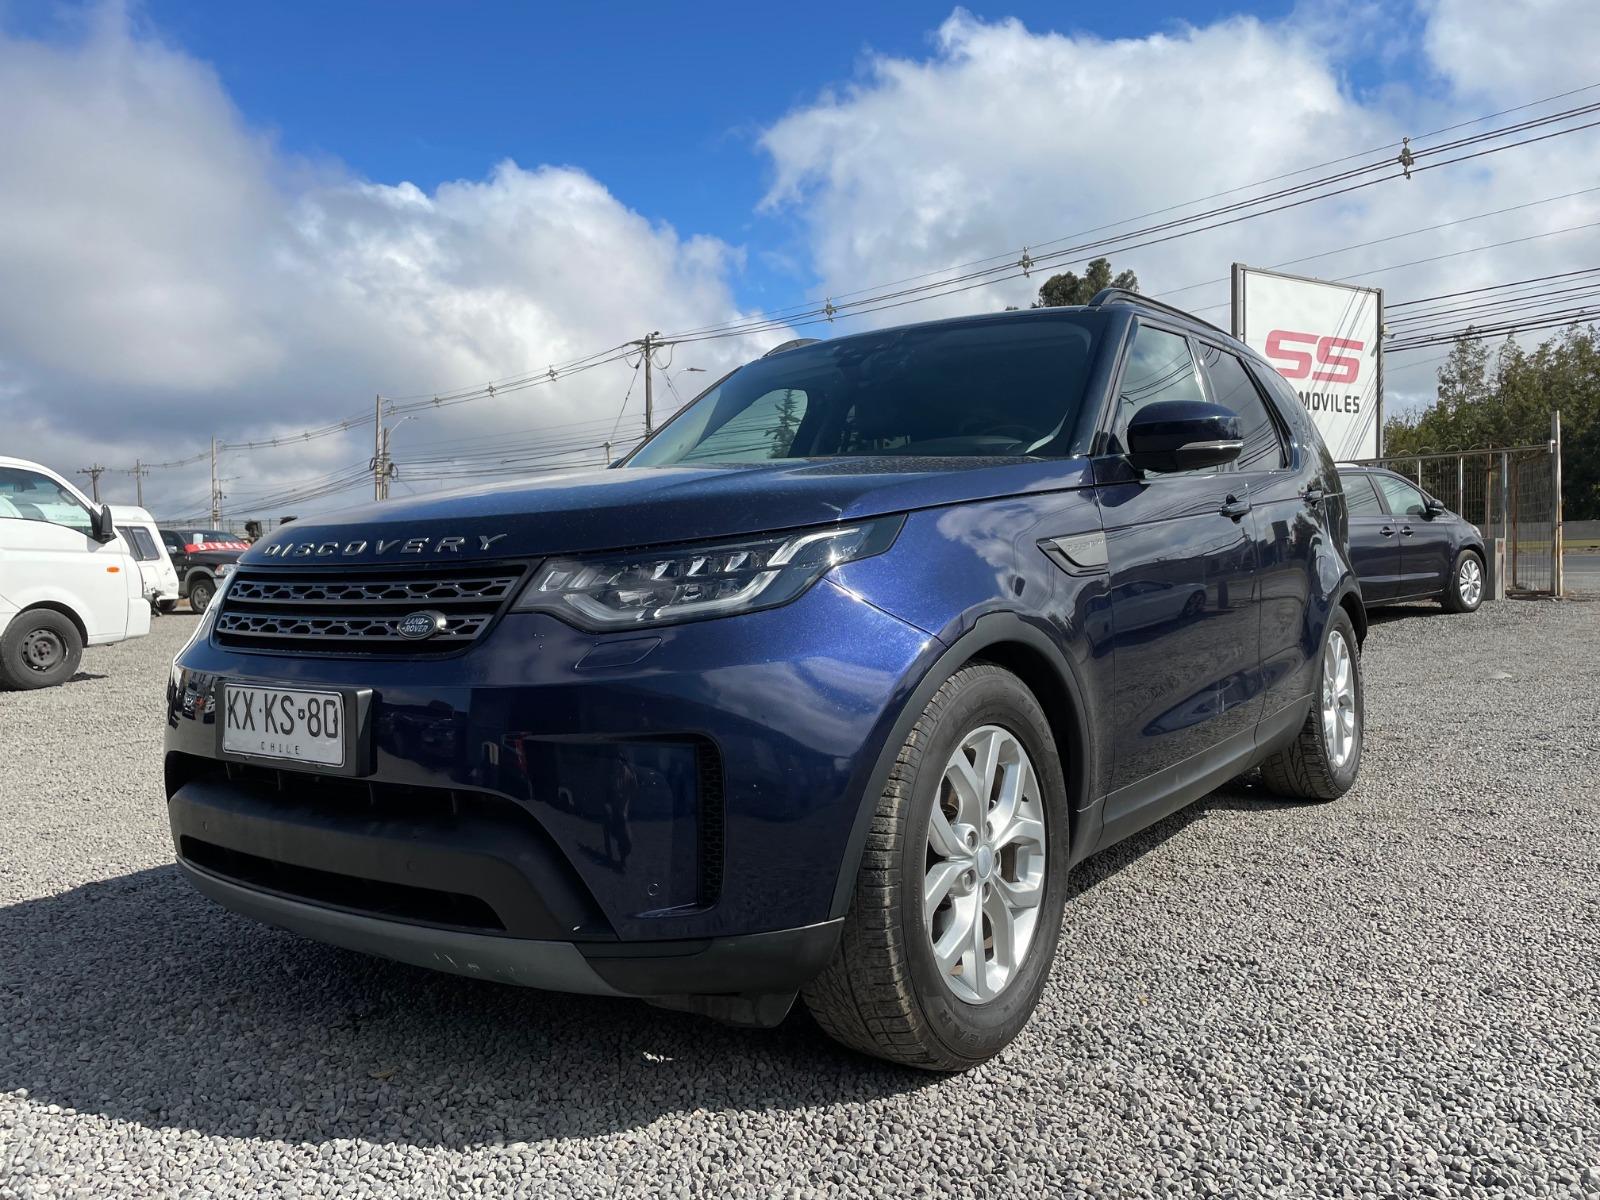 LAND ROVER DISCOVERY 4X4 2.0 AT 2019 Land Rover Discovery - SS AUTOMOVILES